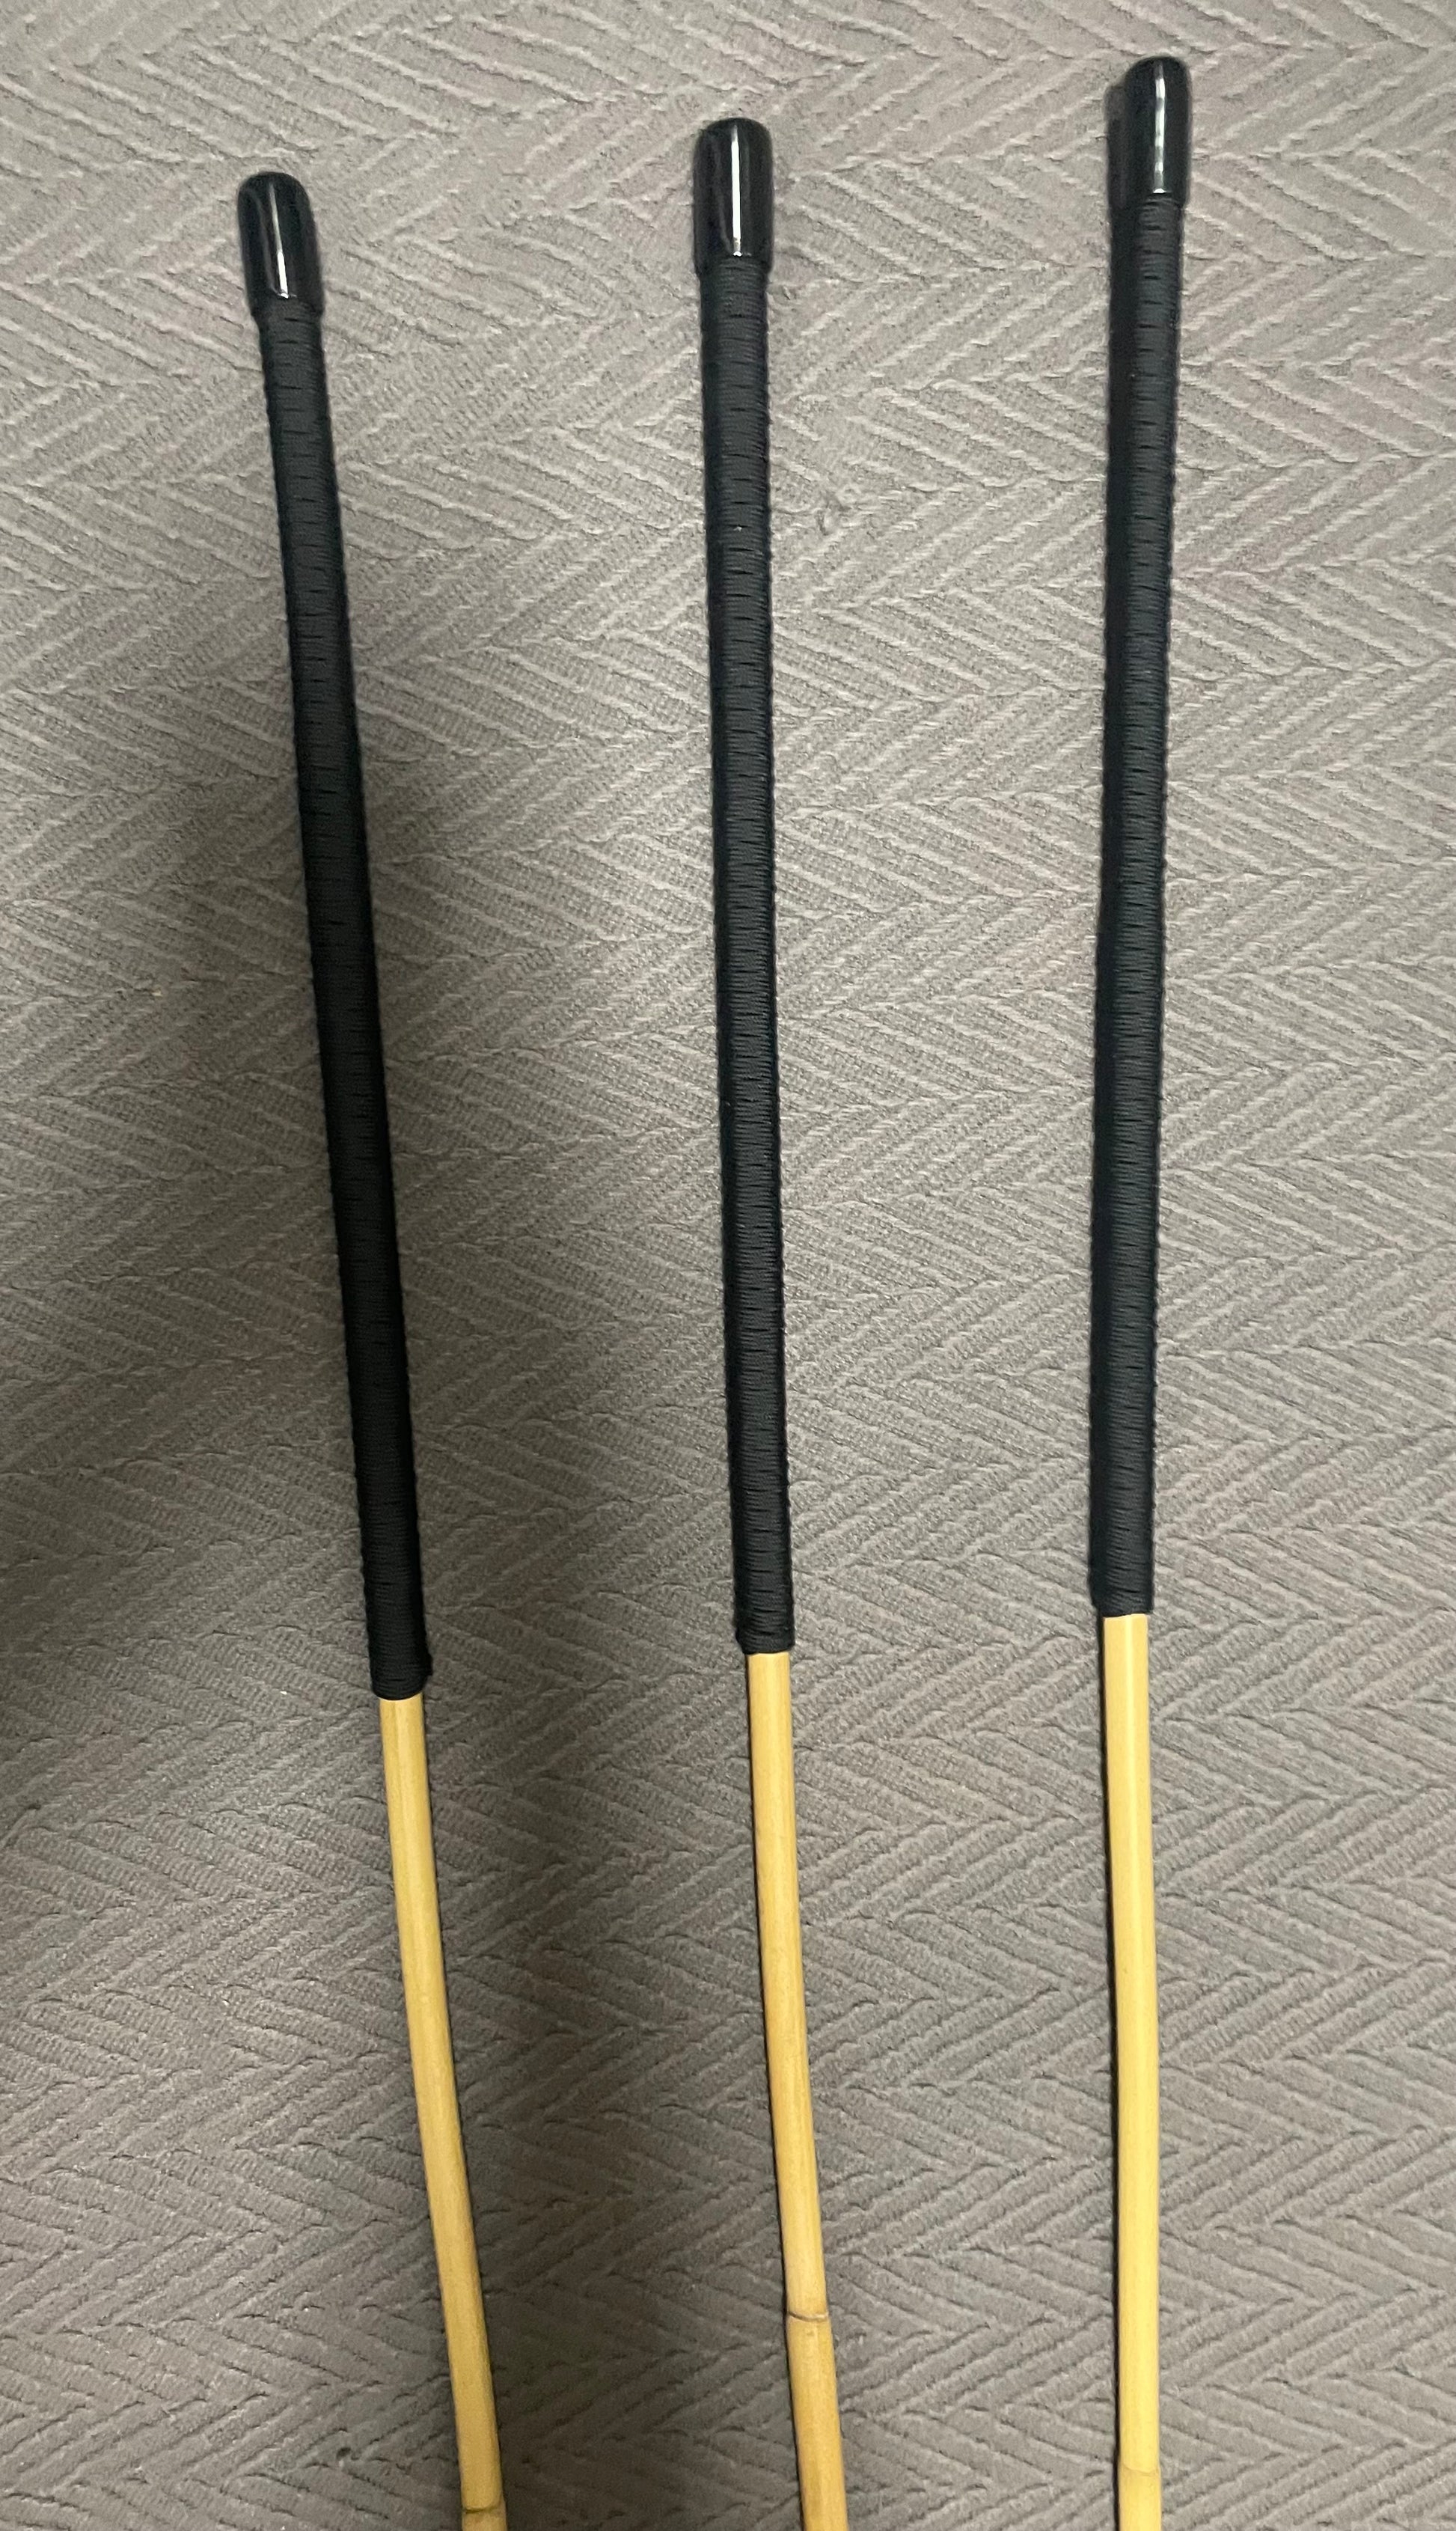 Set of 3 Classic Dragon Canes / School Canes  with 14" Black Paracord Handles  - 95  cms L & 9.5 - 11 mm D - Englishvice Canes